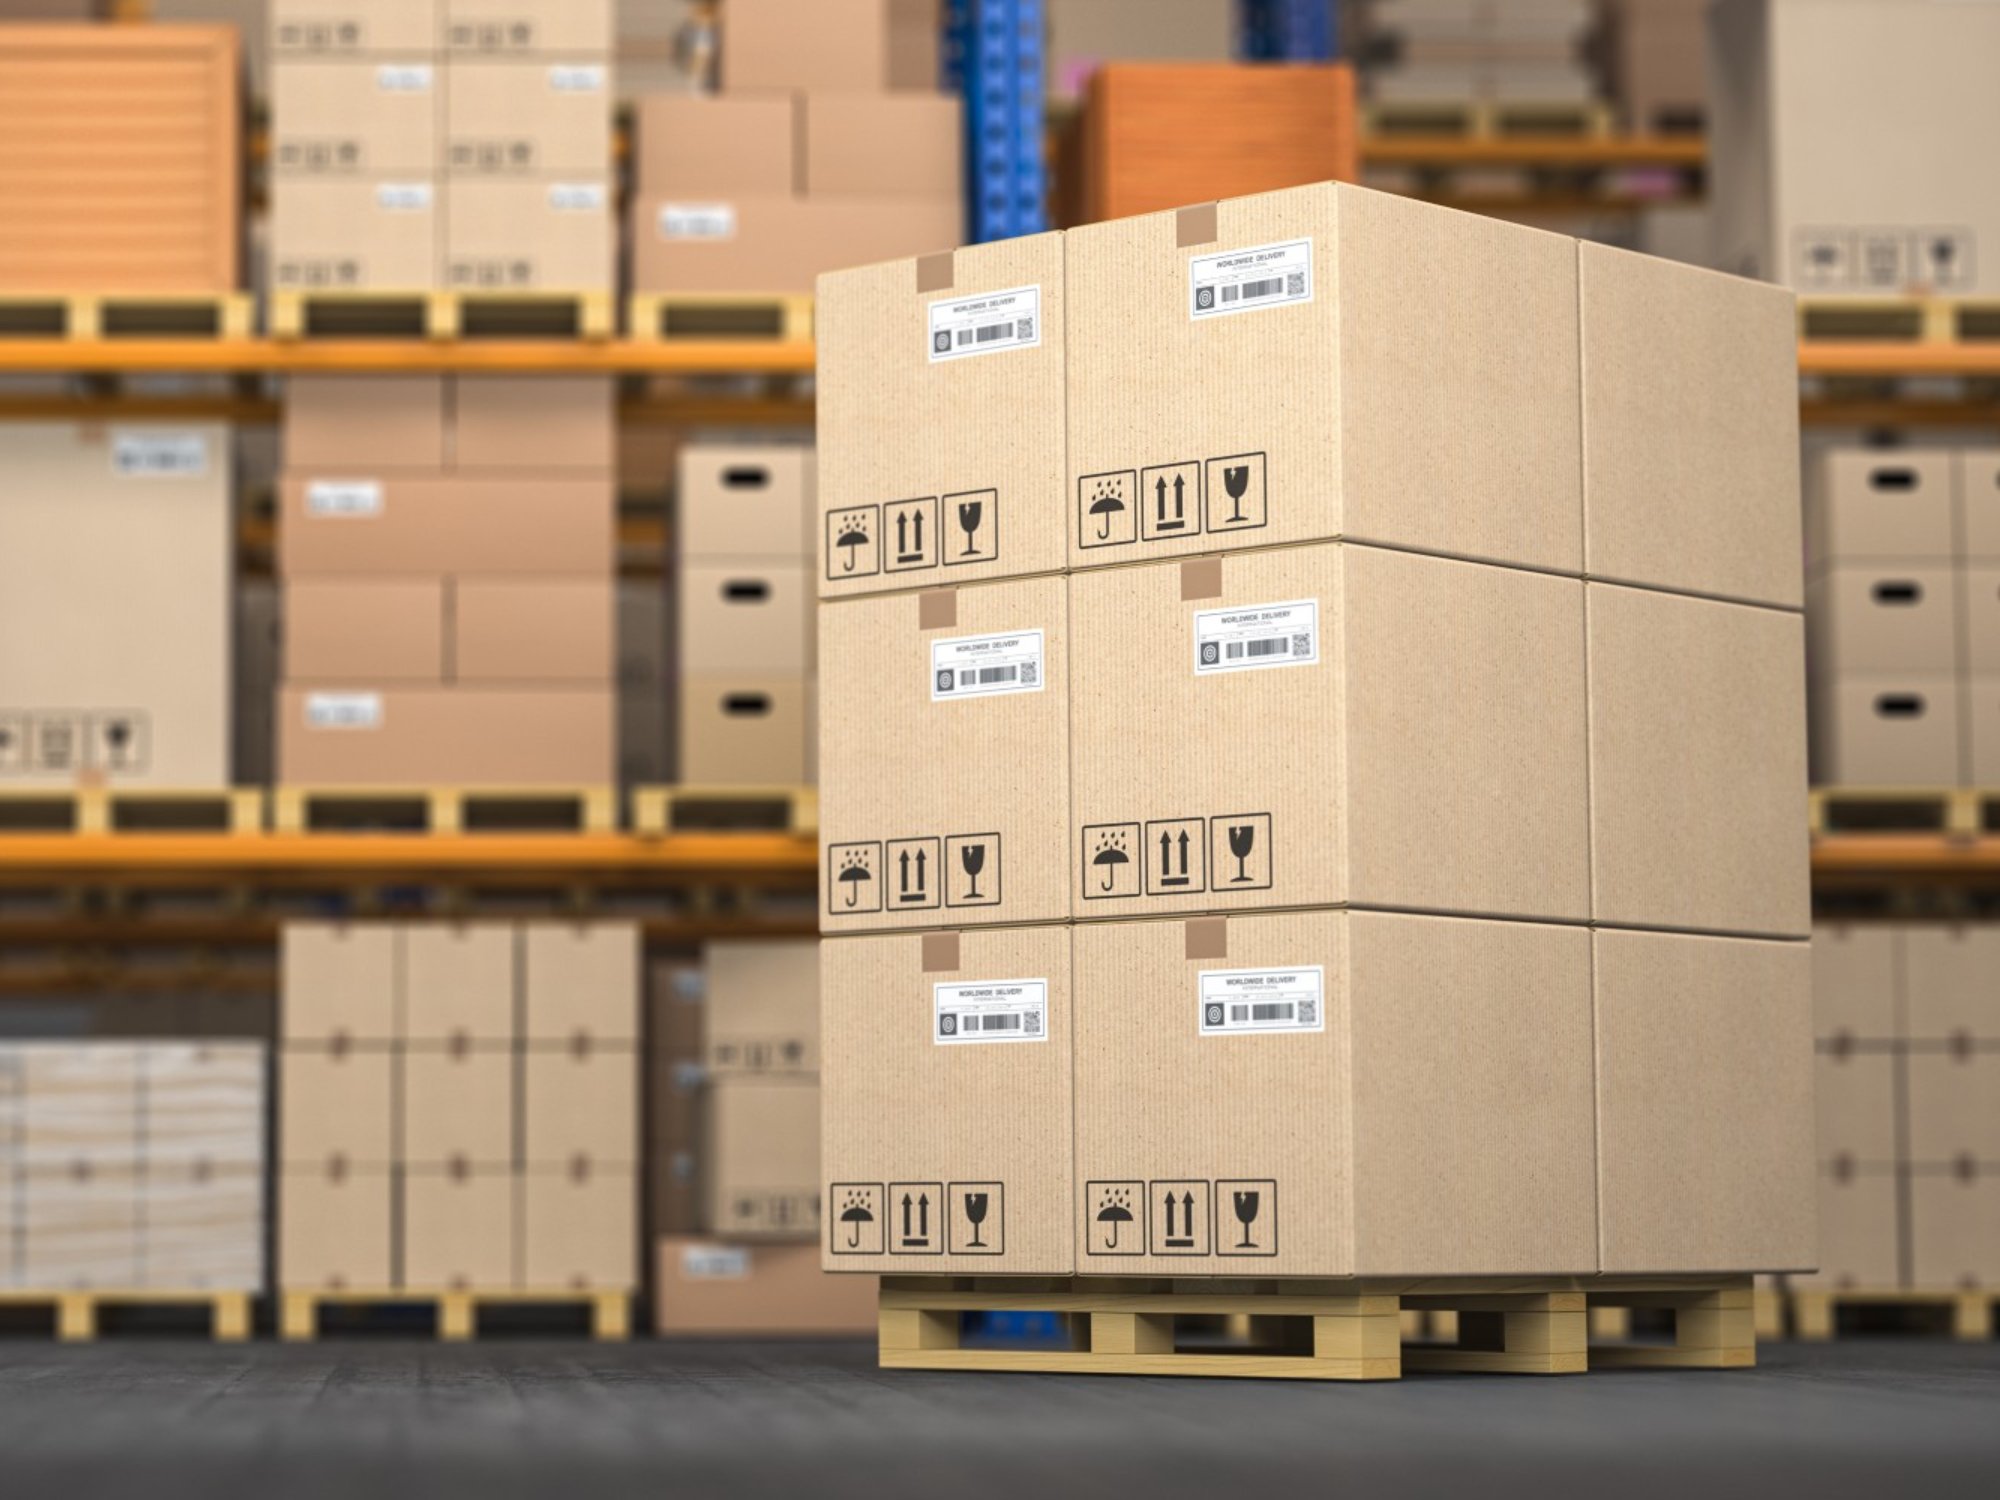 https://elements.envato.com/fr/warehouse-or-storage-with-cardboard-boxes-on-a-pal-UE8JCKT